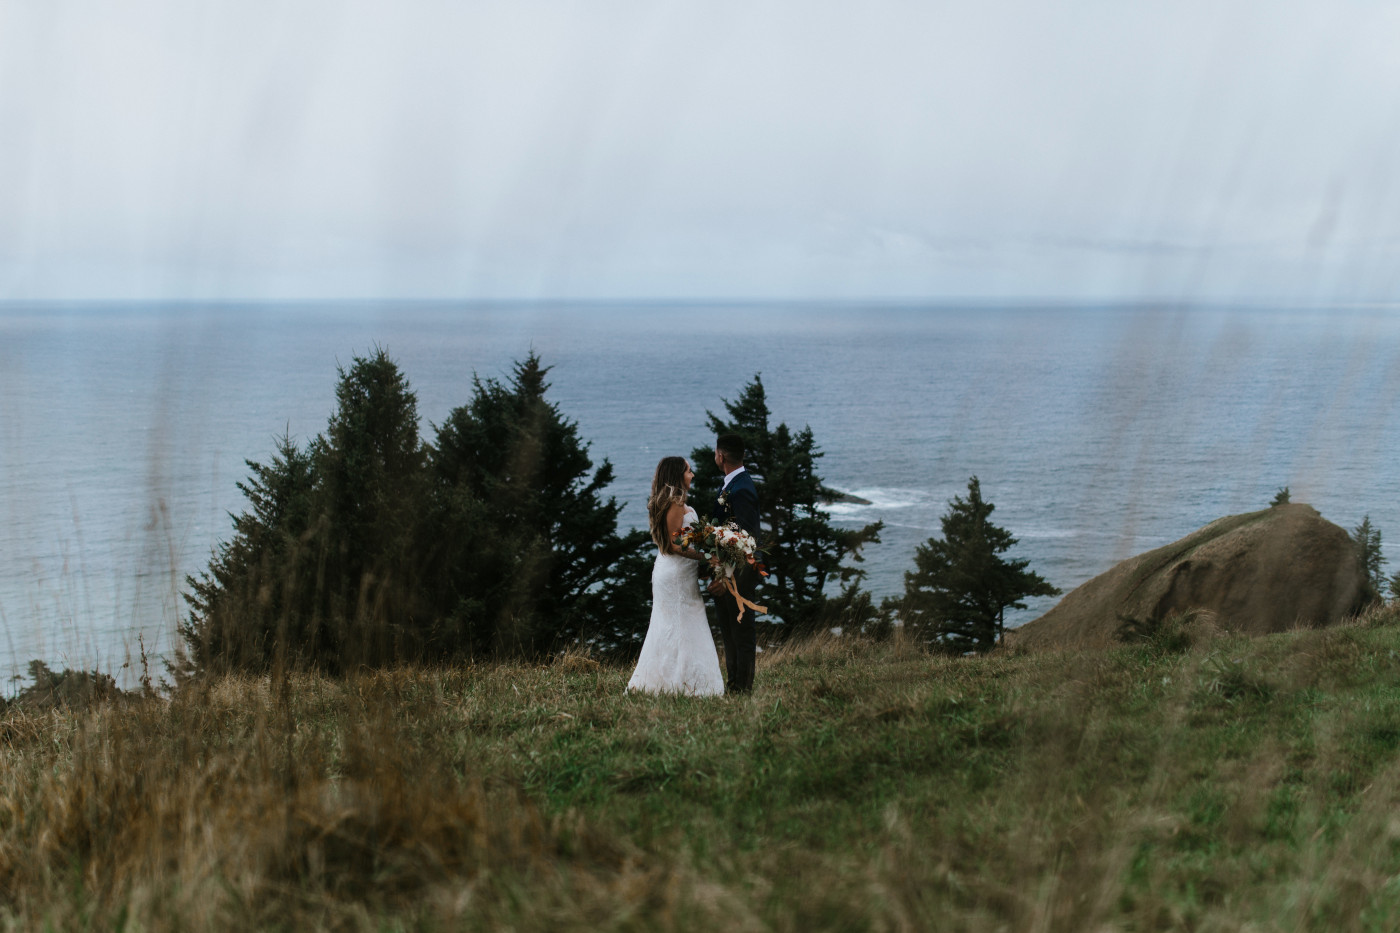 Deandre and Ariana stand together. Elopement photography at Mount Hood by Sienna Plus Josh.